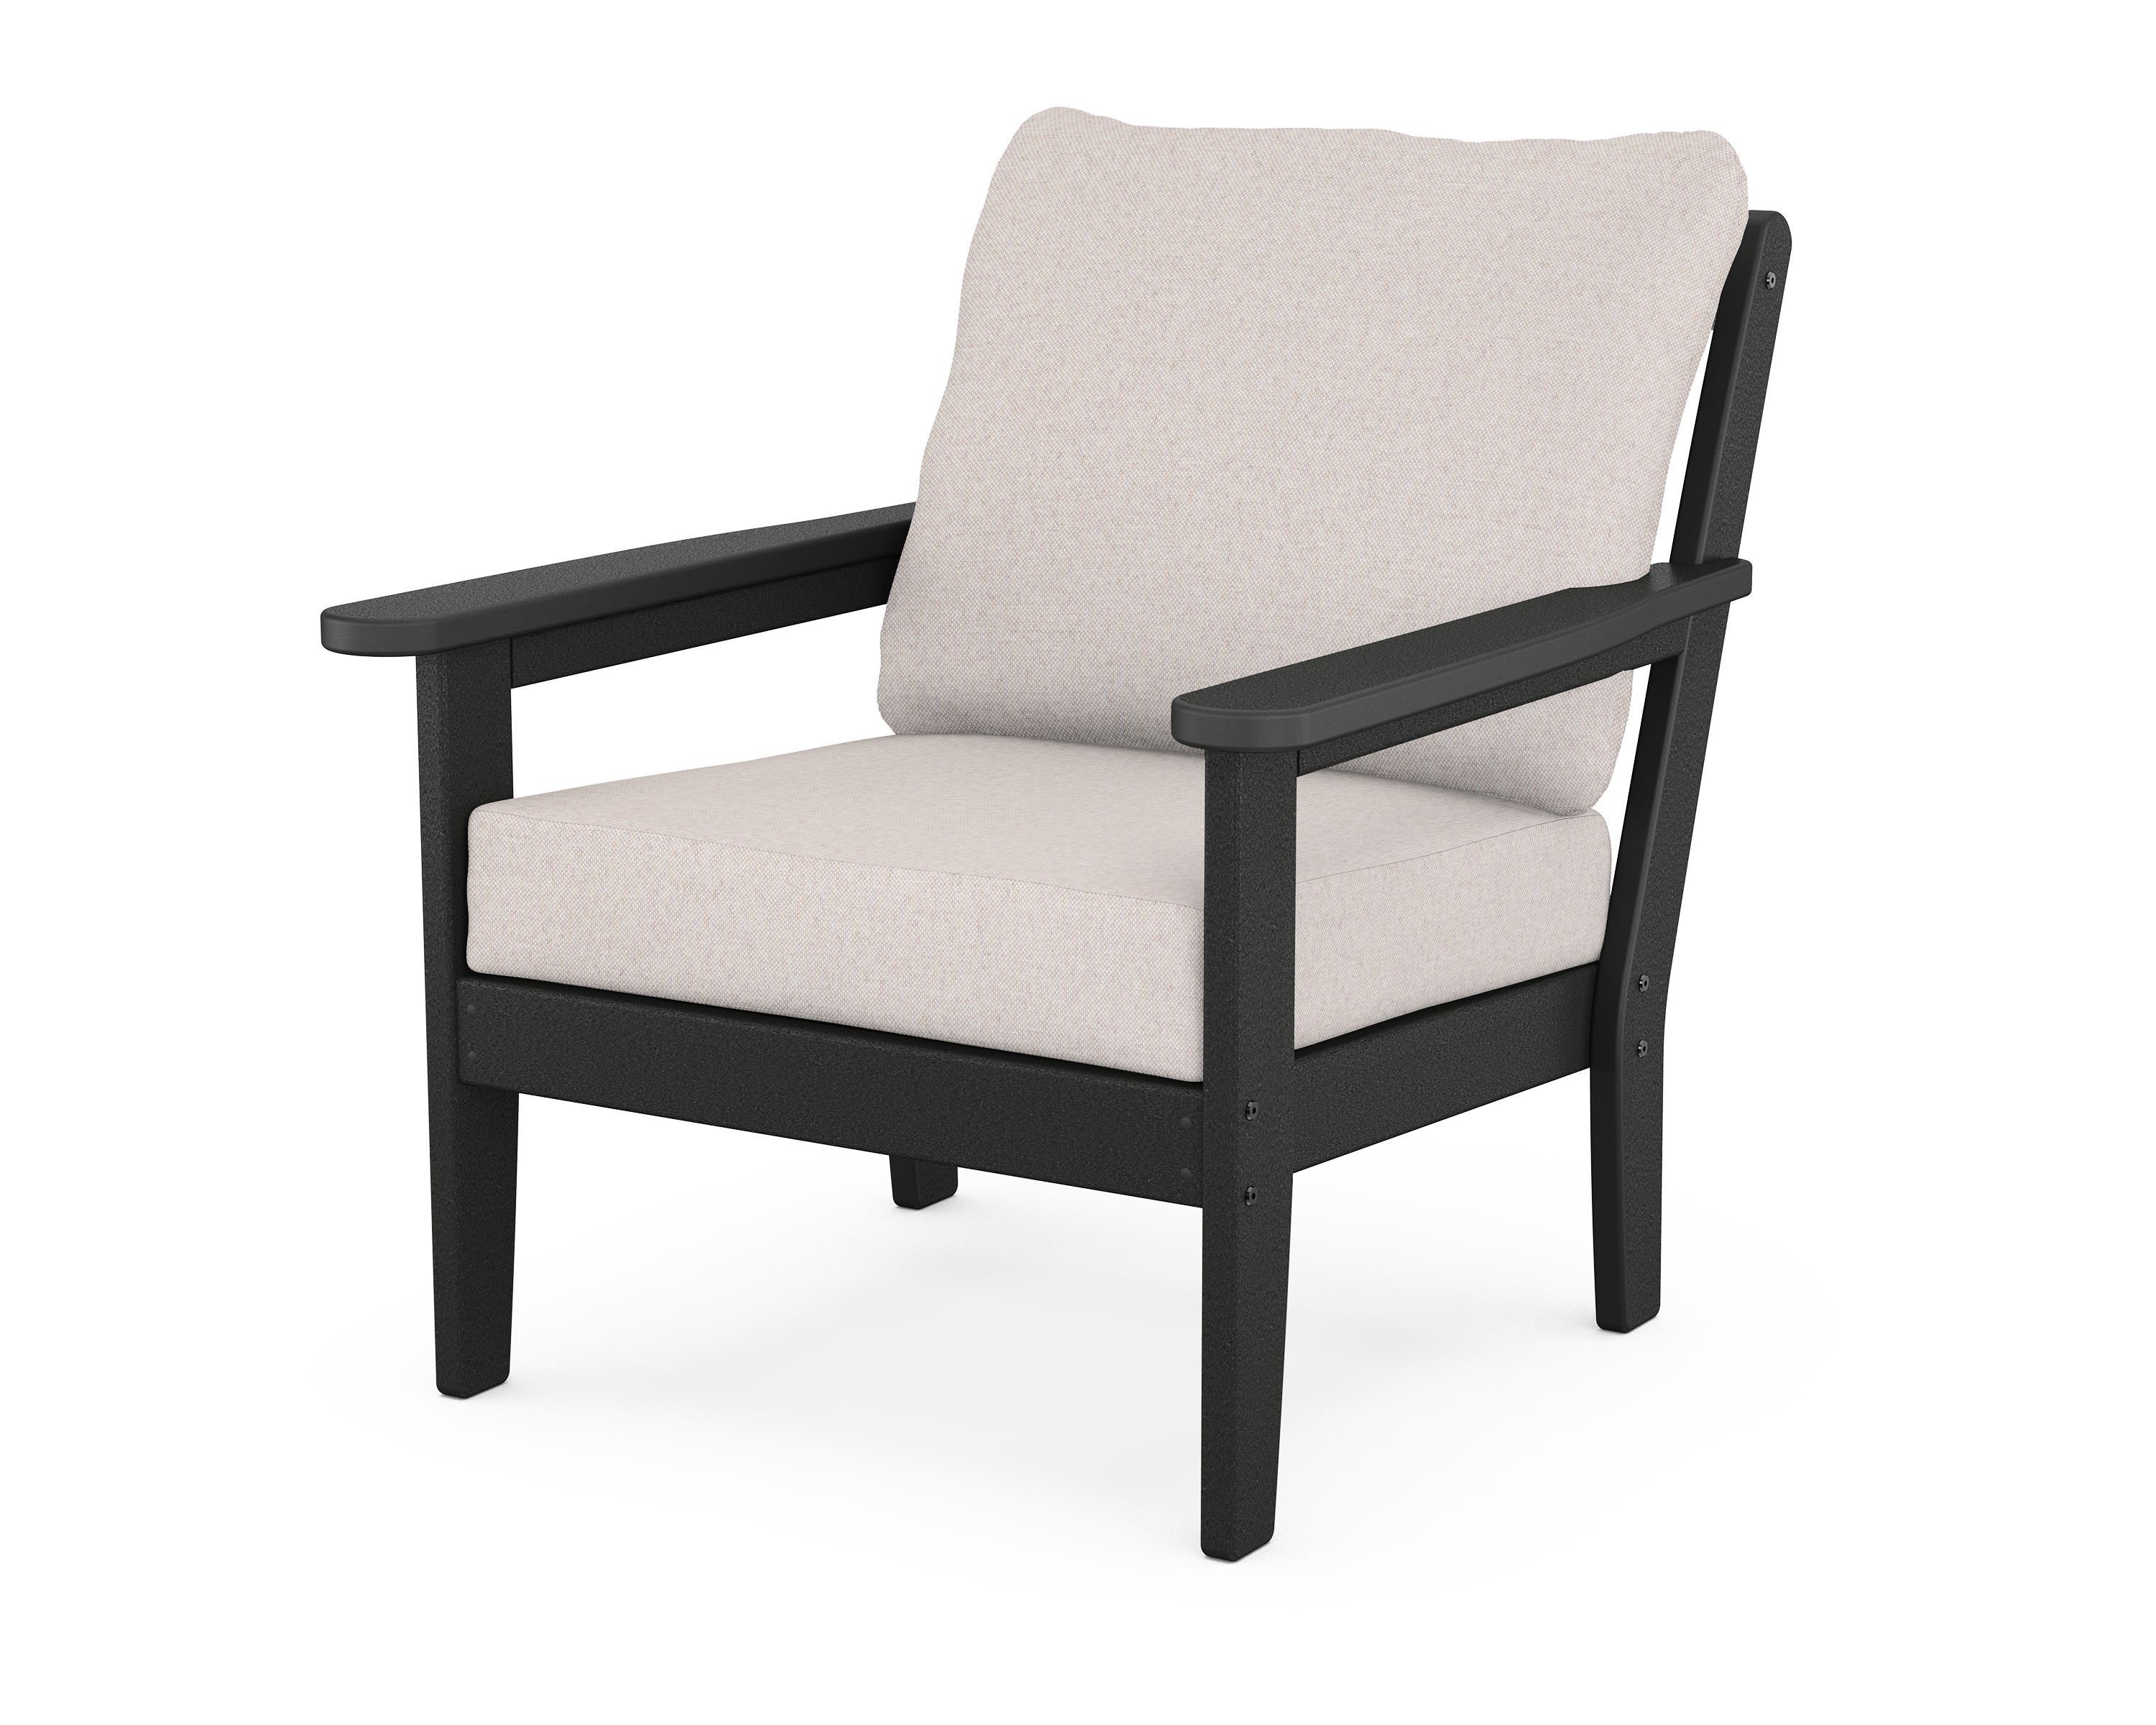 POLYWOOD Country Living Deep Seating Chair